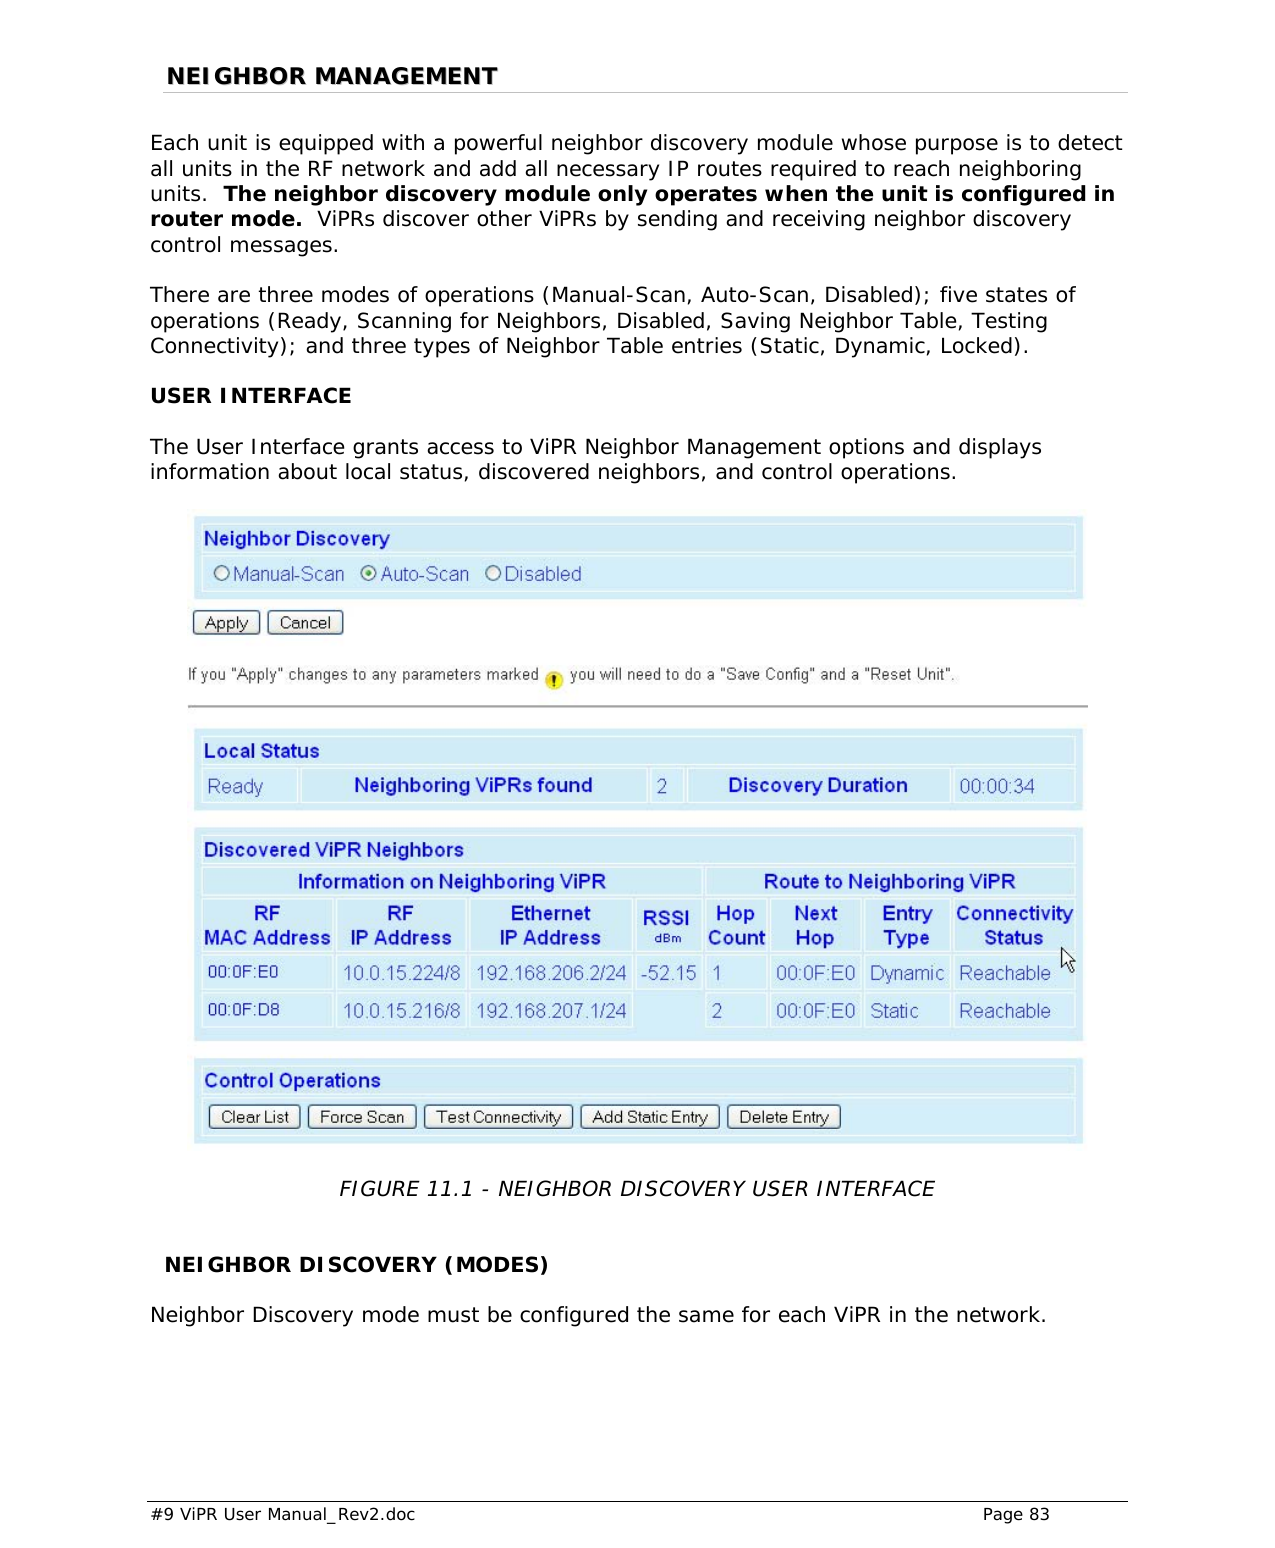  #9 ViPR User Manual_Rev2.doc    Page 83  NNEEIIGGHHBBOORR  MMAANNAAGGEEMMEENNTT  Each unit is equipped with a powerful neighbor discovery module whose purpose is to detect all units in the RF network and add all necessary IP routes required to reach neighboring units.  The neighbor discovery module only operates when the unit is configured in router mode.  ViPRs discover other ViPRs by sending and receiving neighbor discovery control messages.  There are three modes of operations (Manual-Scan, Auto-Scan, Disabled); five states of operations (Ready, Scanning for Neighbors, Disabled, Saving Neighbor Table, Testing Connectivity); and three types of Neighbor Table entries (Static, Dynamic, Locked). USER INTERFACE The User Interface grants access to ViPR Neighbor Management options and displays information about local status, discovered neighbors, and control operations.    FIGURE 11.1 - NEIGHBOR DISCOVERY USER INTERFACE    NEIGHBOR DISCOVERY (MODES) Neighbor Discovery mode must be configured the same for each ViPR in the network.